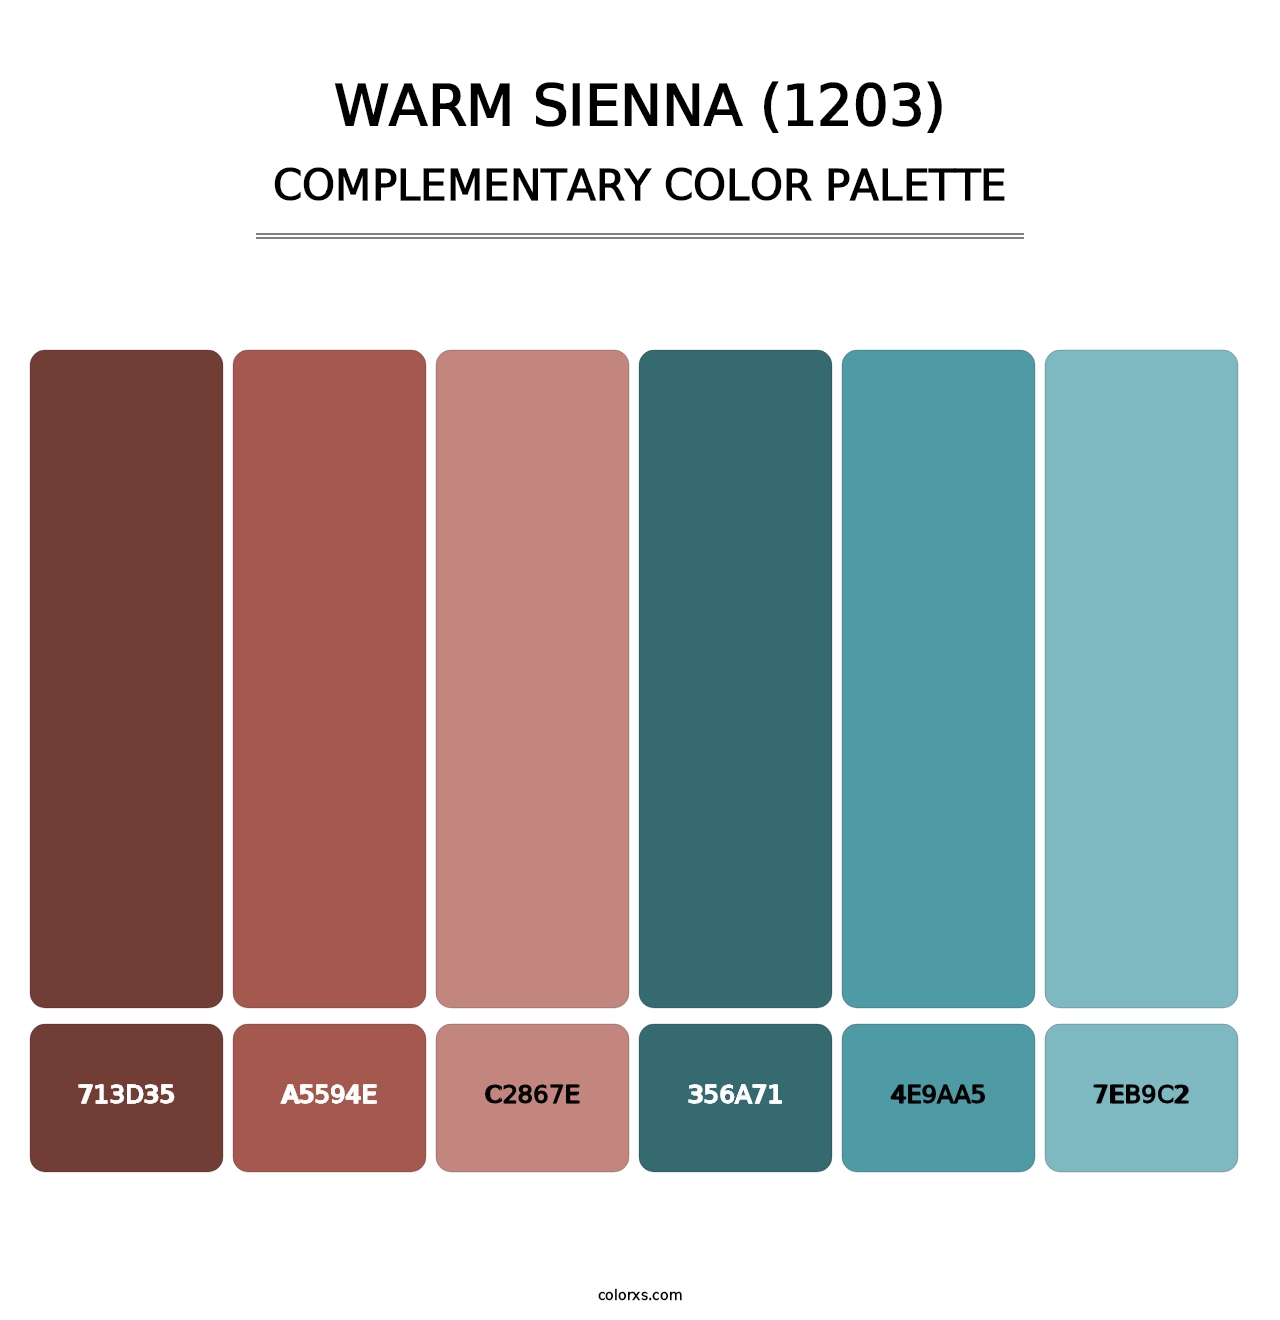 Warm Sienna (1203) - Complementary Color Palette